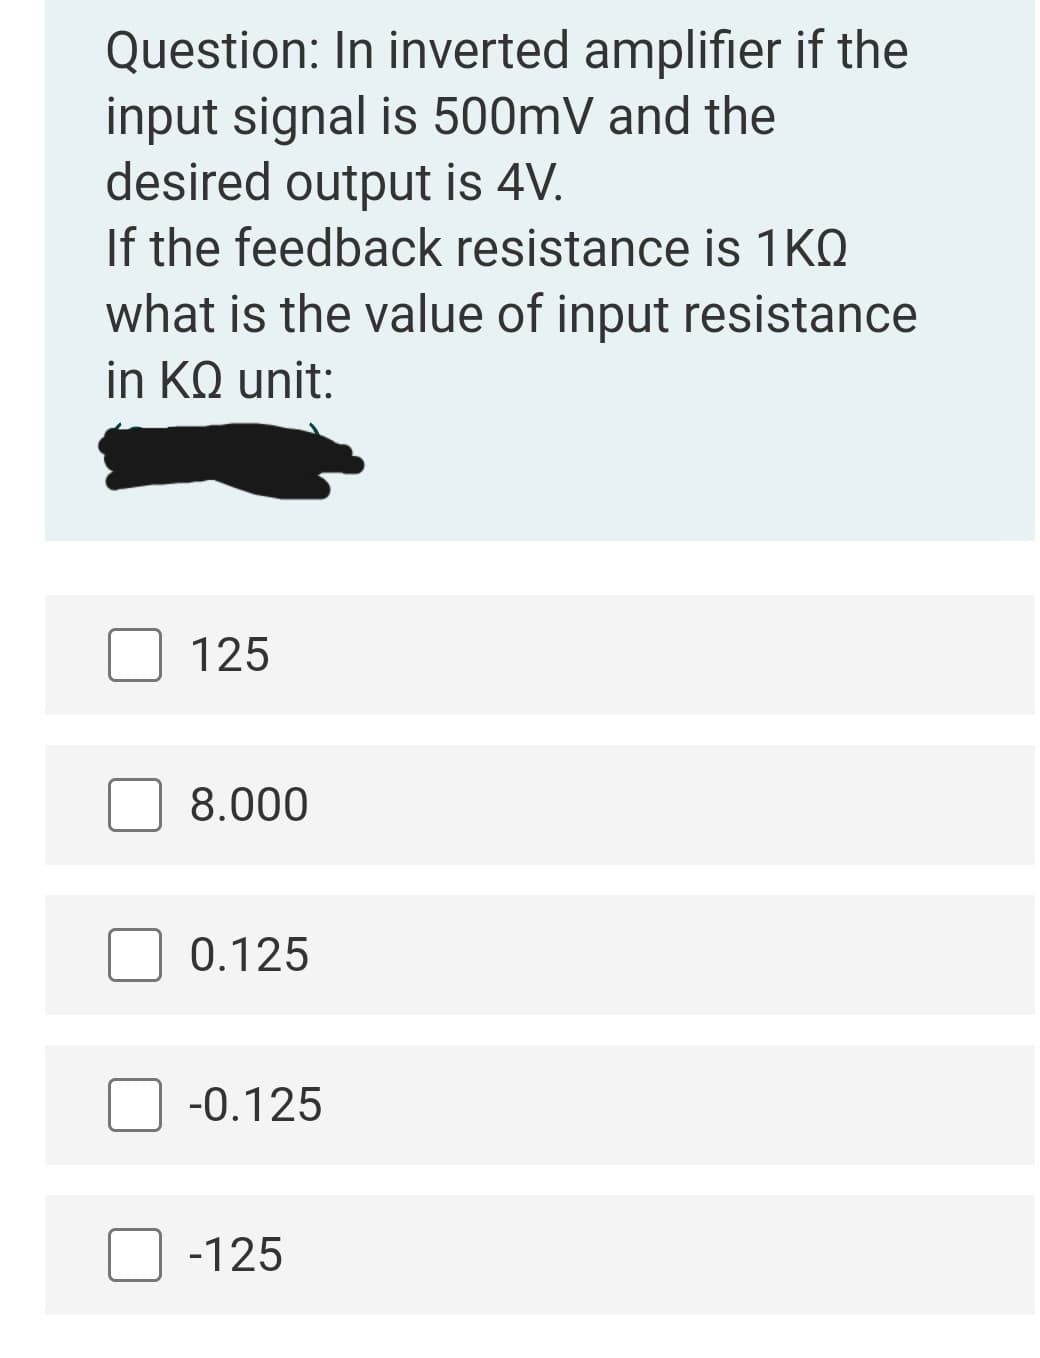 Question: In inverted amplifier if the
input signal is 500mV and the
desired output is 4V.
If the feedback resistance is 1KQ
what is the value of input resistance
in KQ unit:
125
8.000
0.125
-0.125
-125
